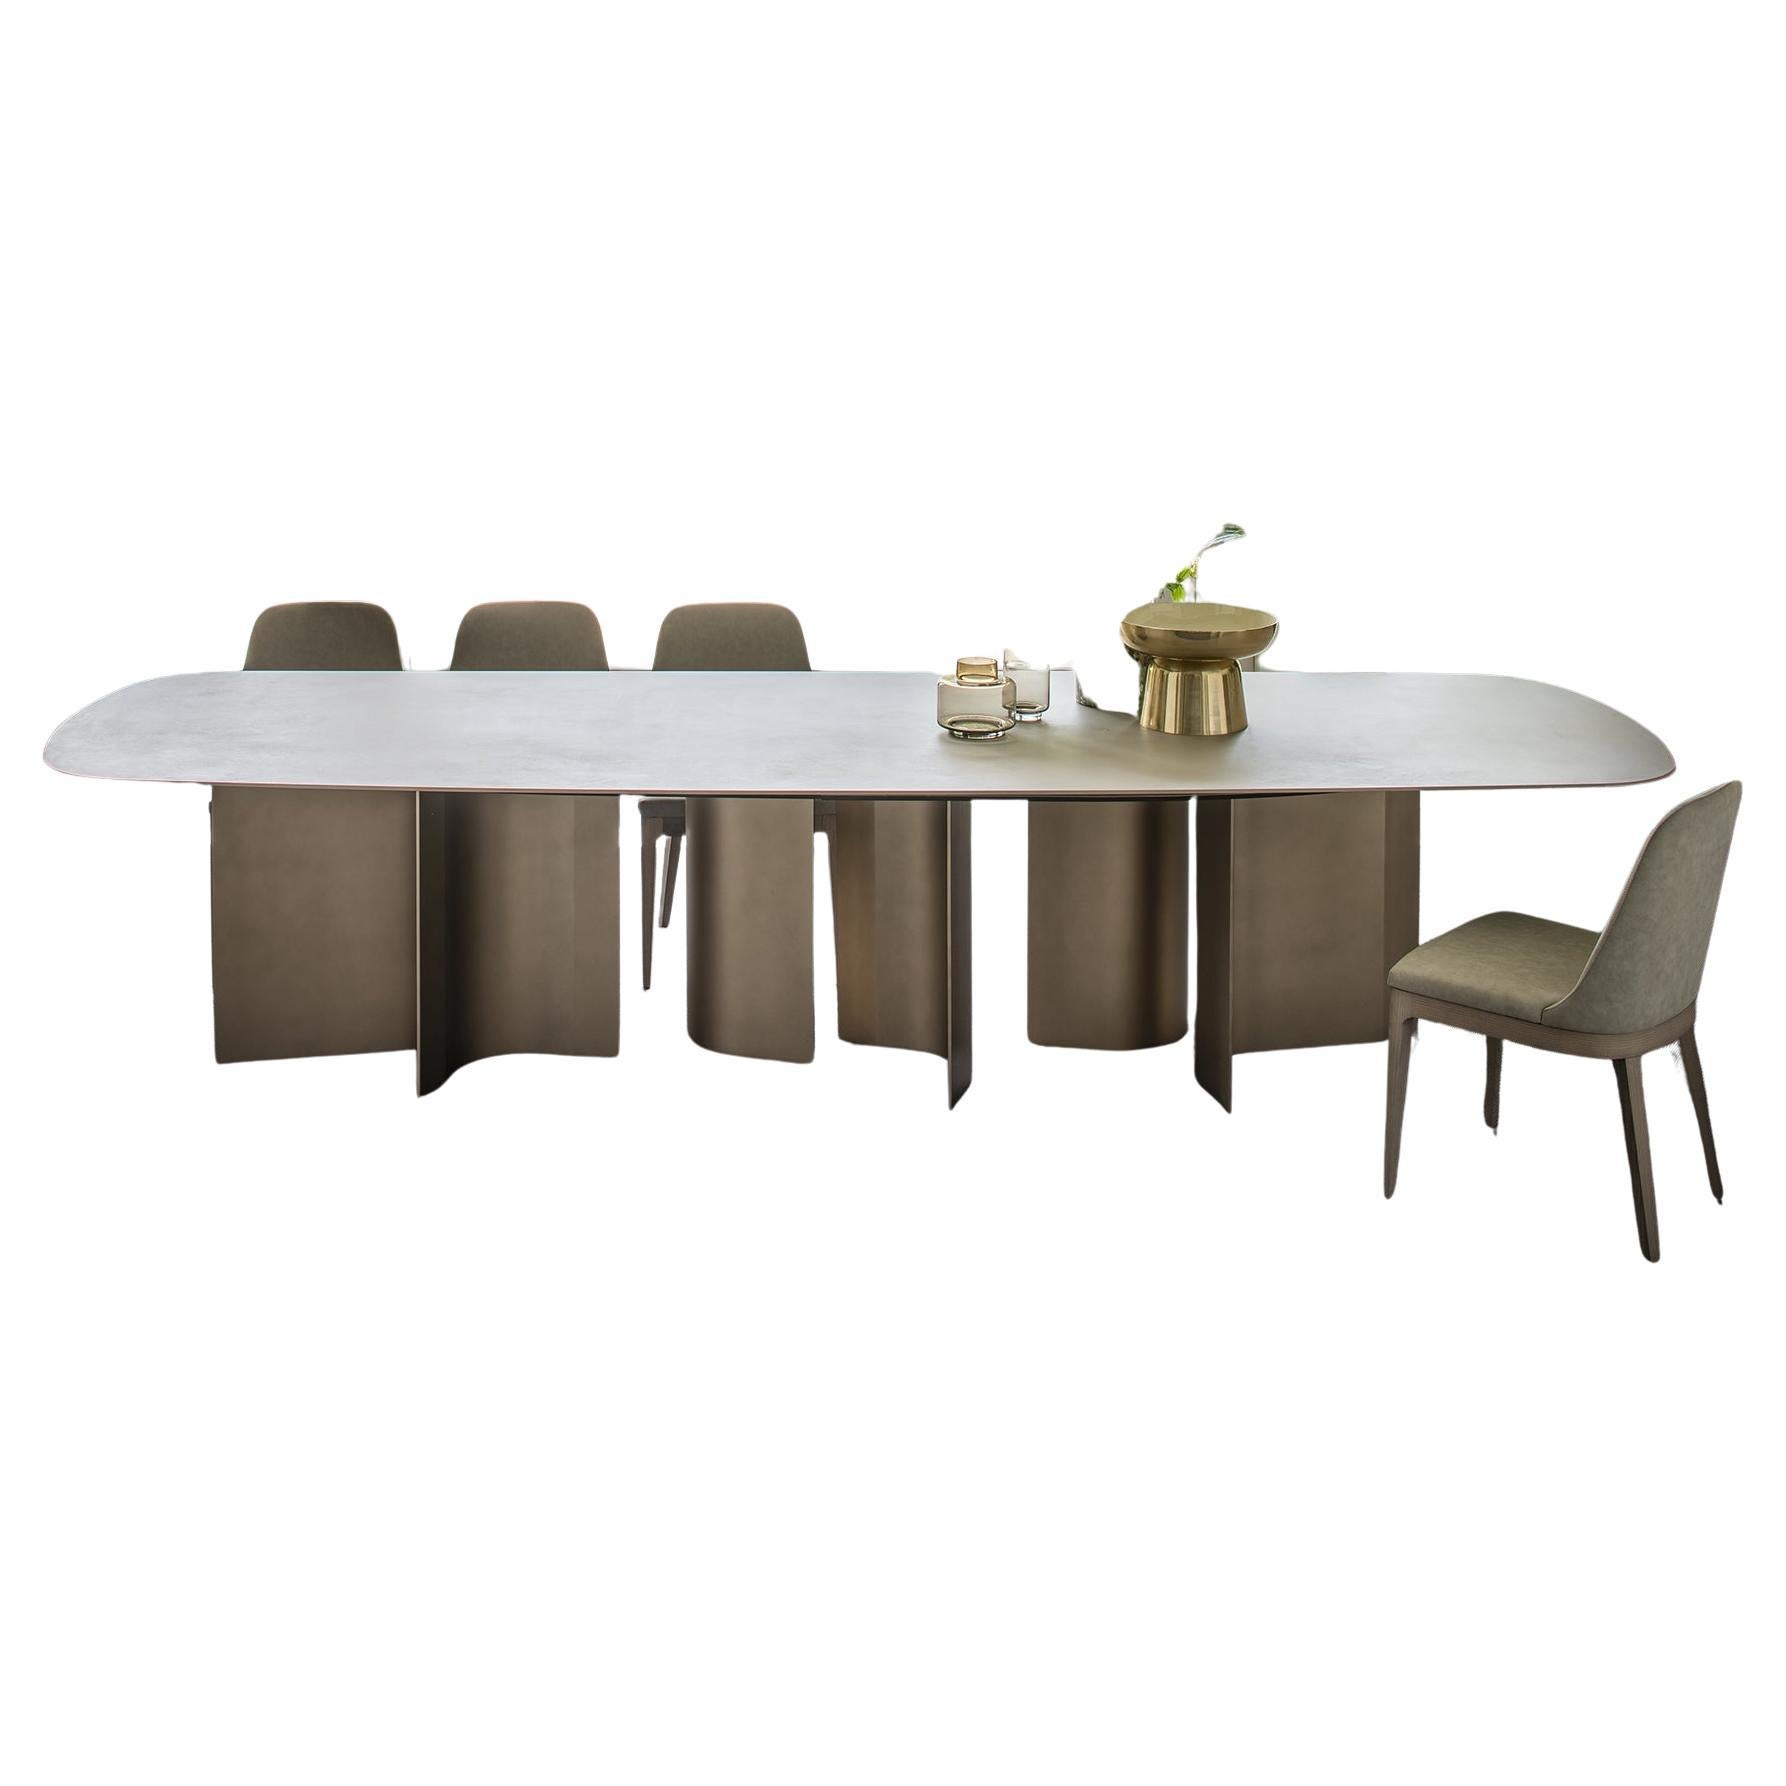 Contemporary Table Wood Clay and Bronzo Lacquered by Studio Oxi For Sale